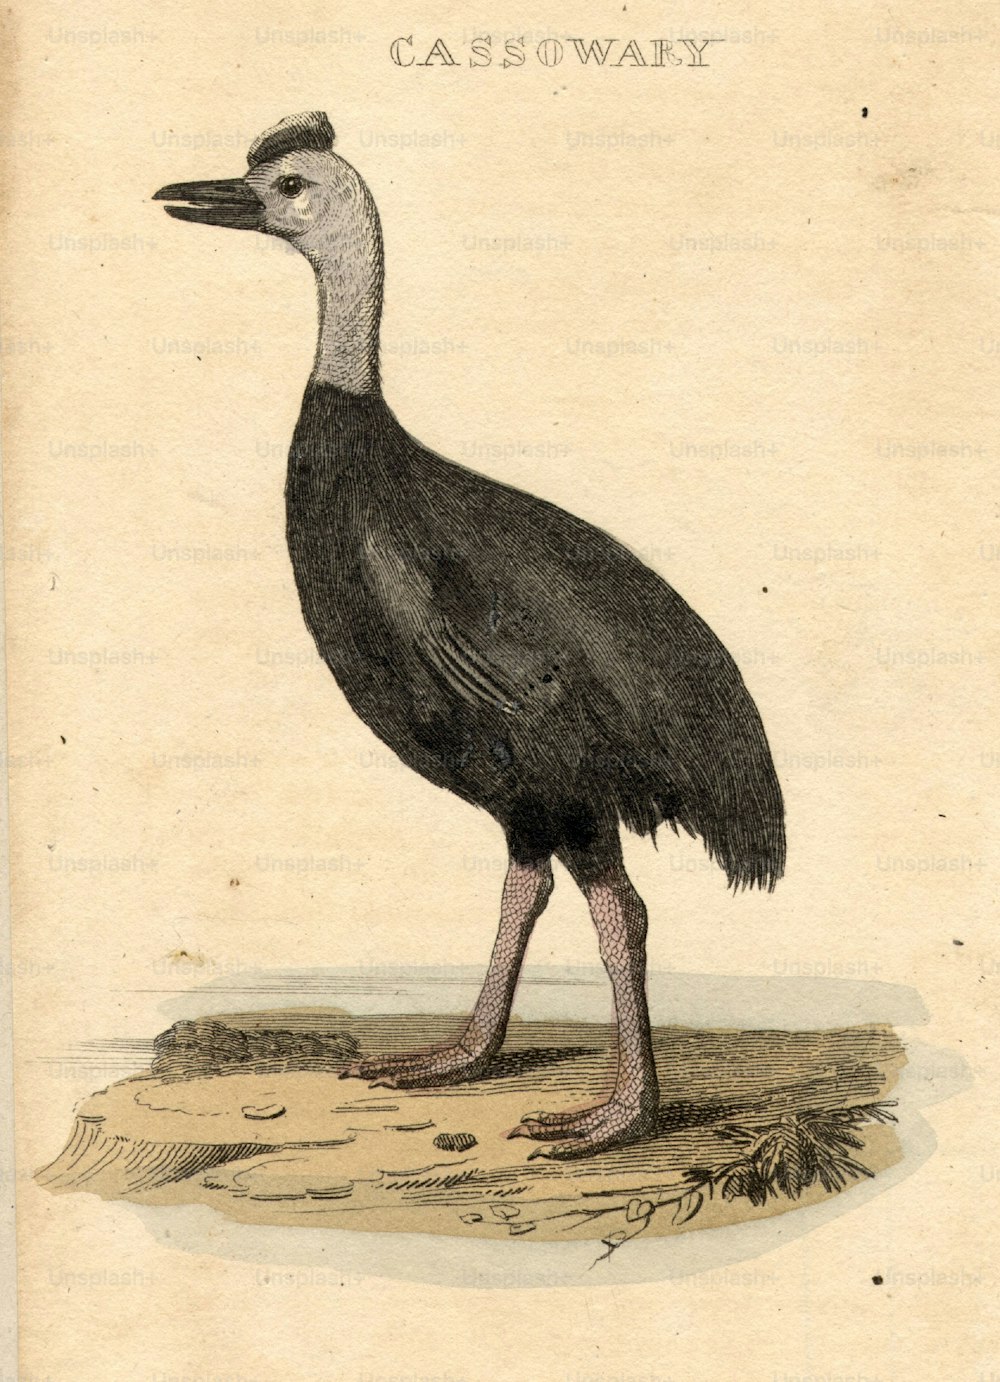 circa 1800:  The Cassowary, a type of flightless bird related to the emu.  (Photo by Hulton Archive/Getty Images)